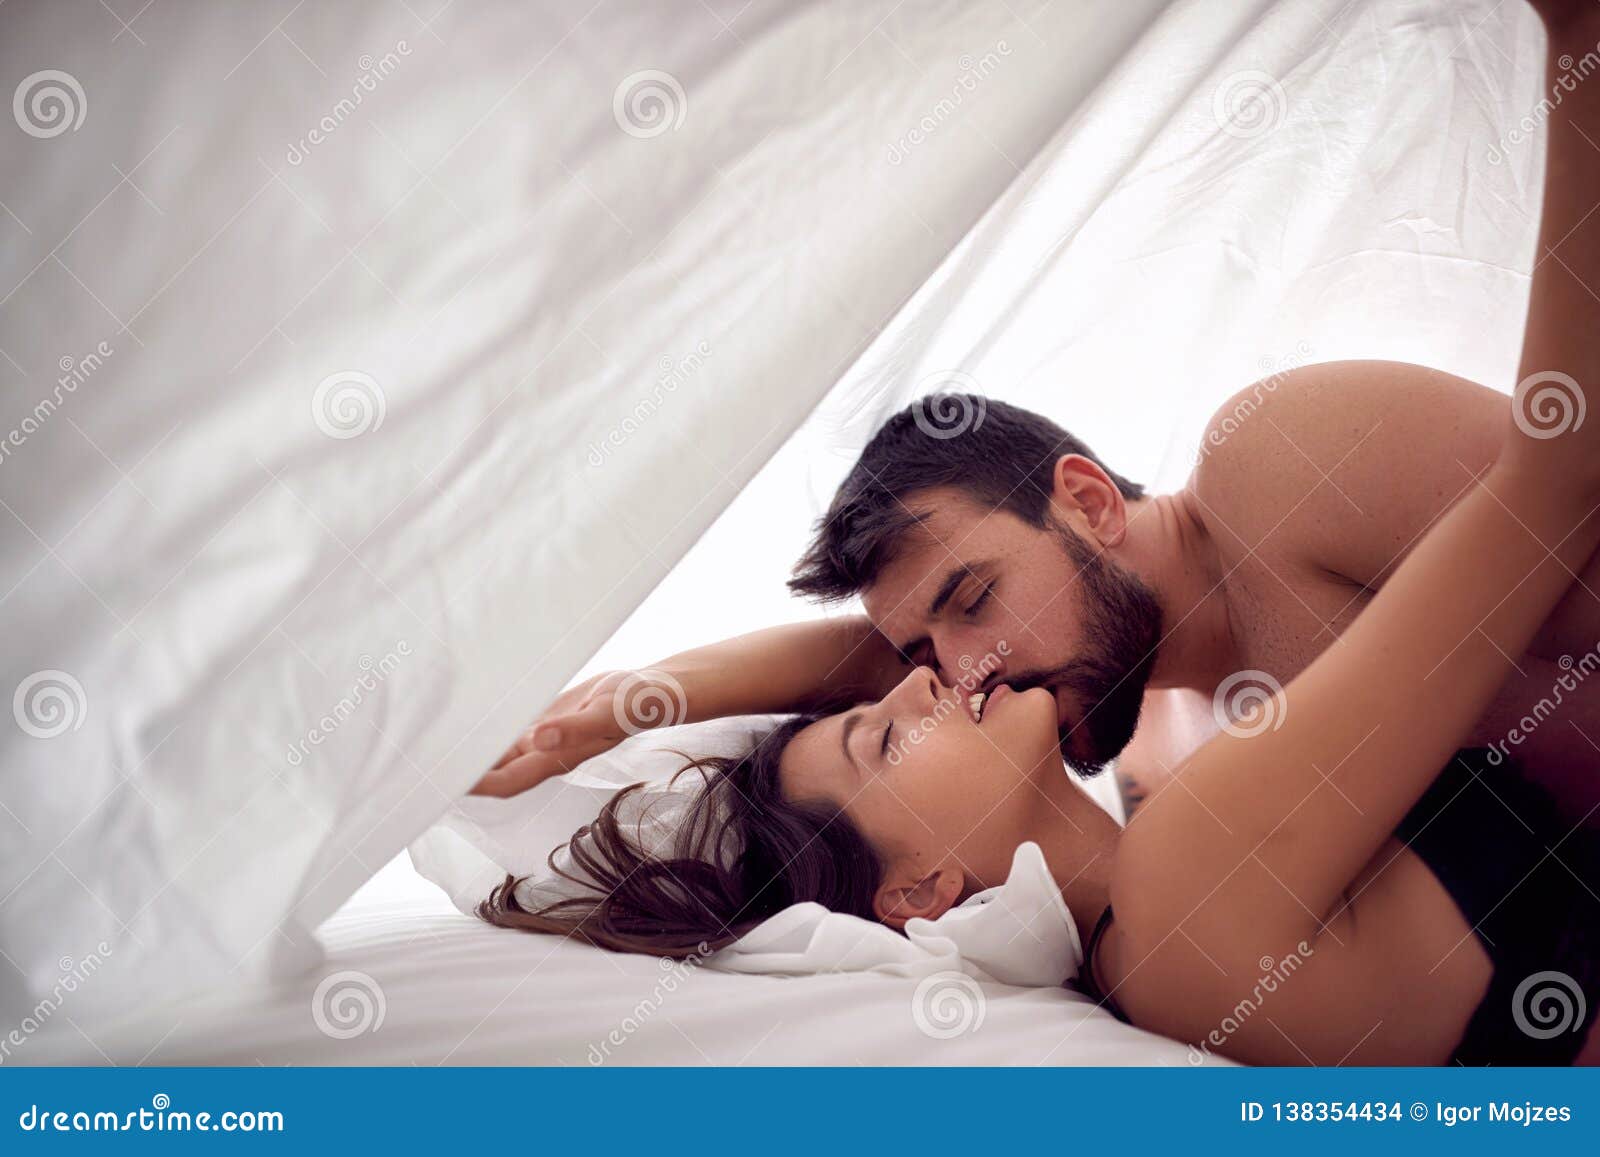 Couple Lovers Having Sex on a Bed in Morning with Lust and Love photo